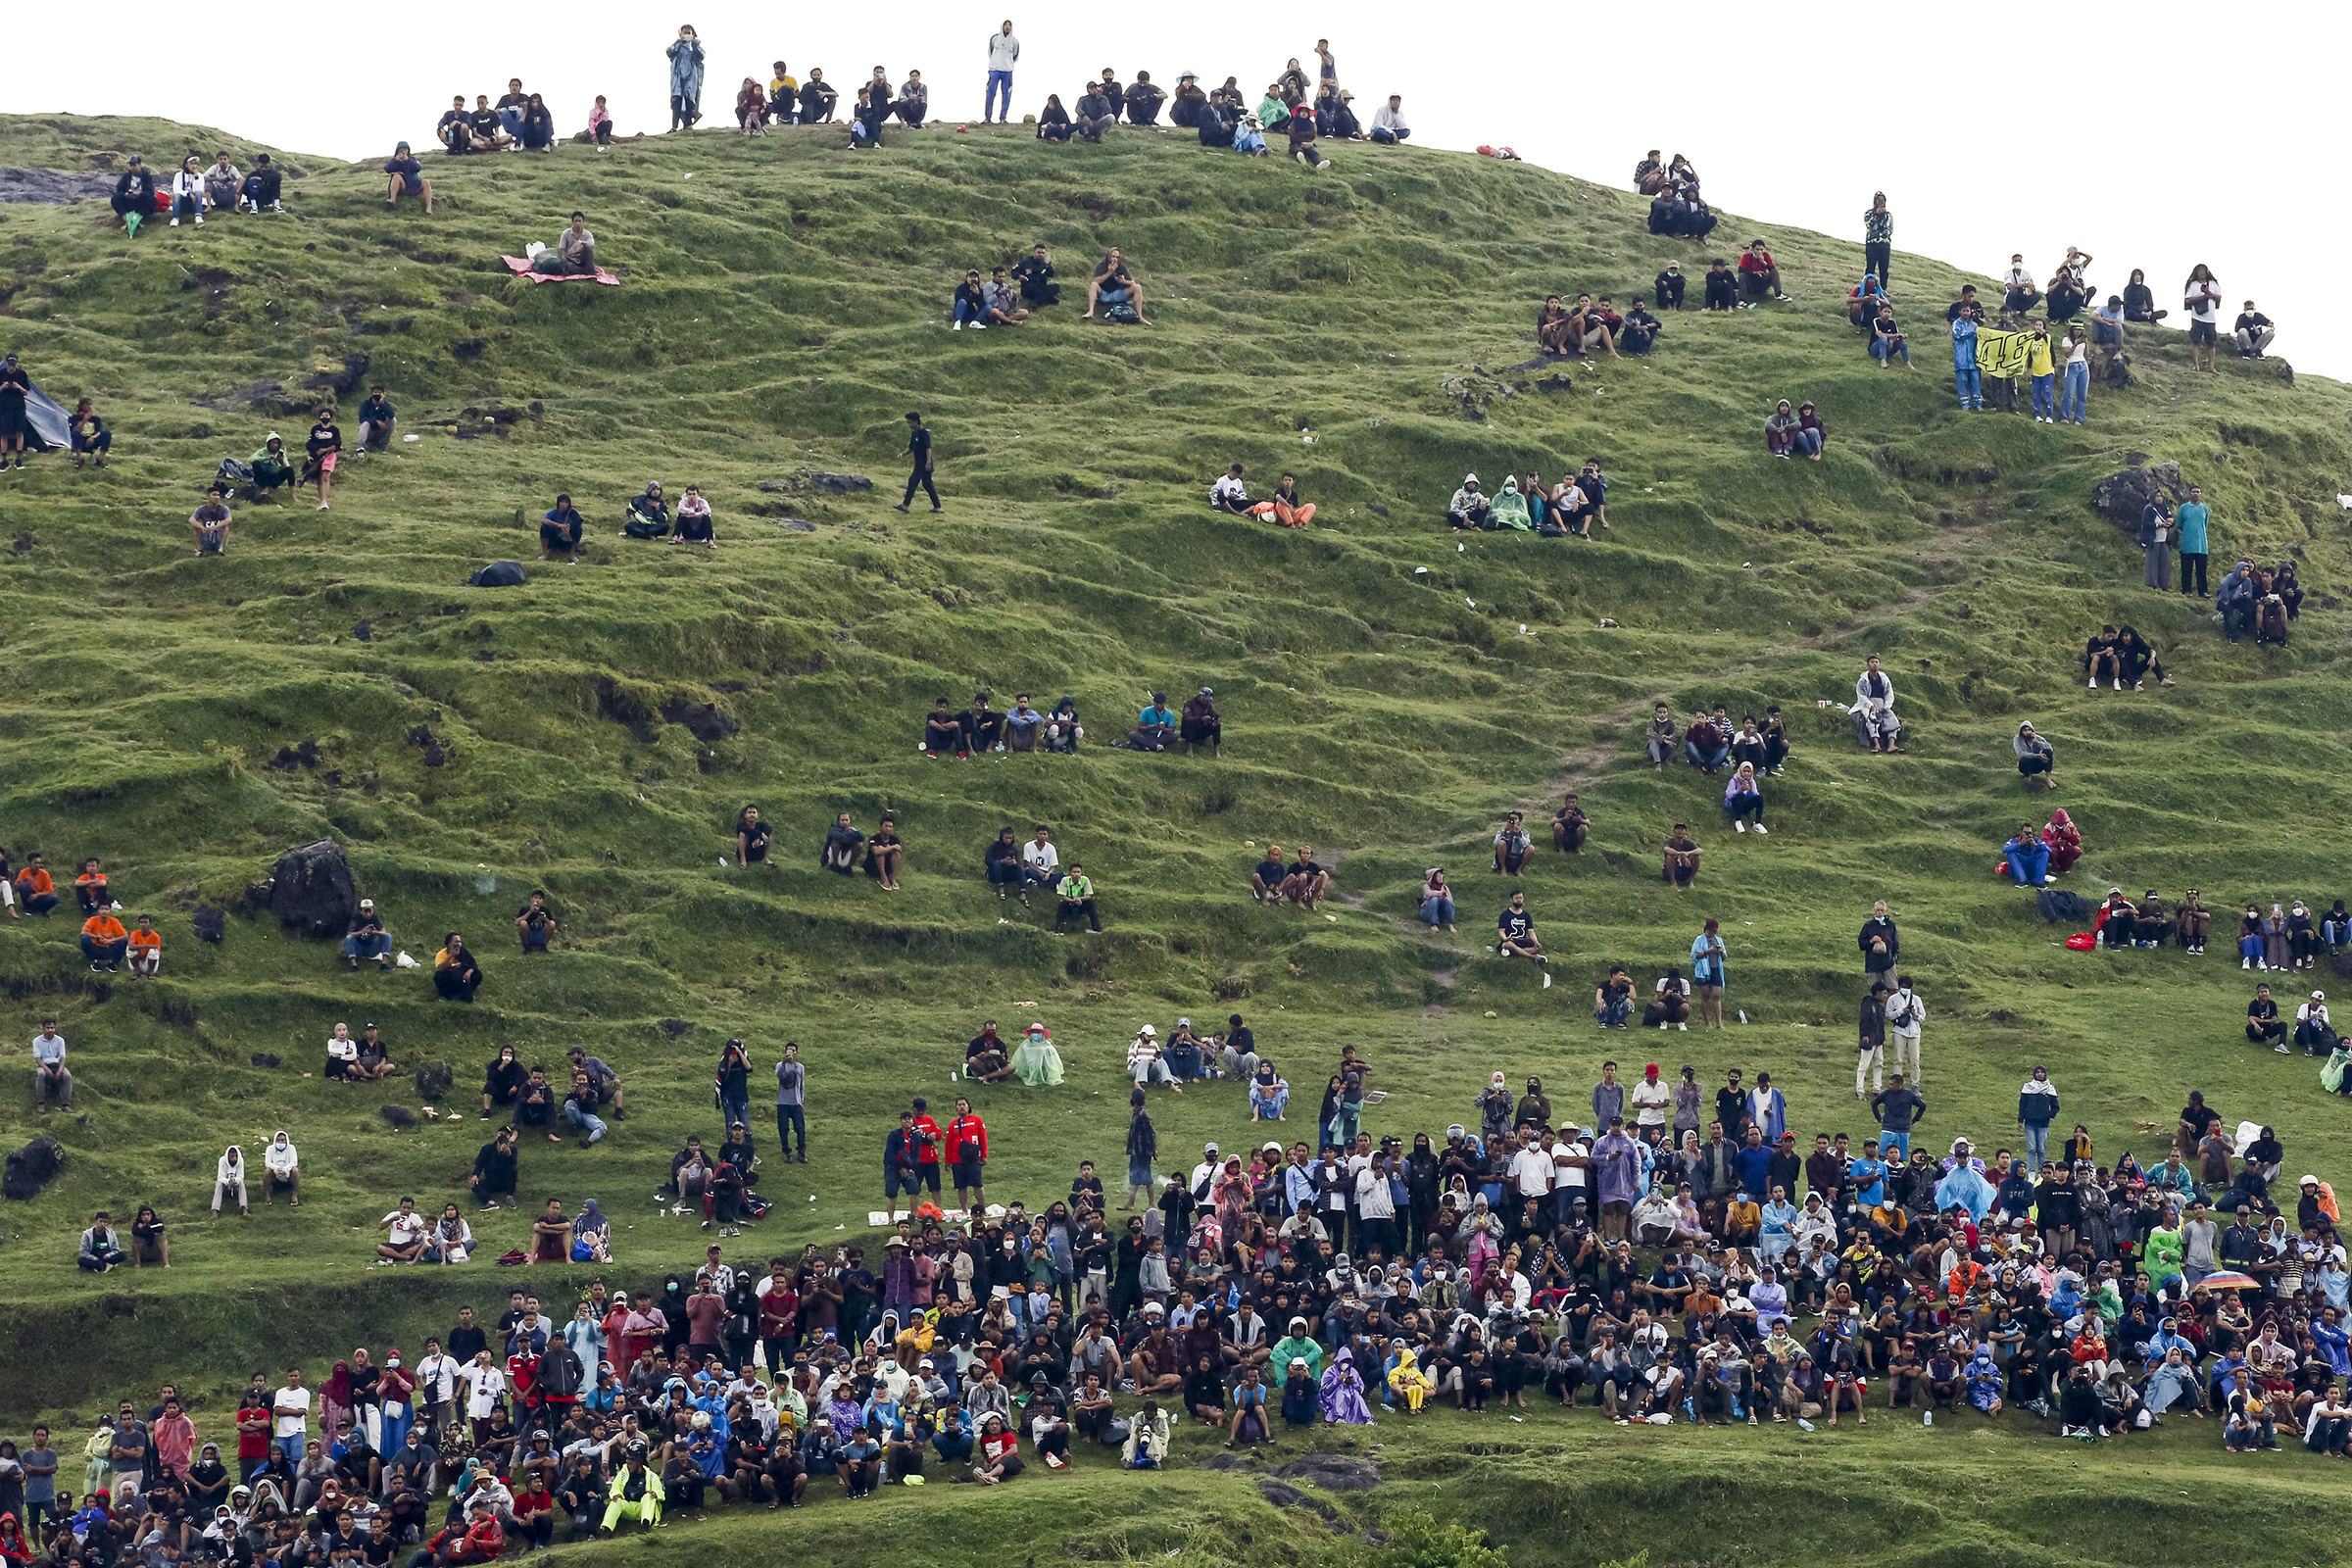 Spectators seen on the hill nearby during the race of MotoGP Pertamina Grand Prix of Indonesia at Mandalika International Street Circuit, Lombok, Indonesia on March 20, 2022.